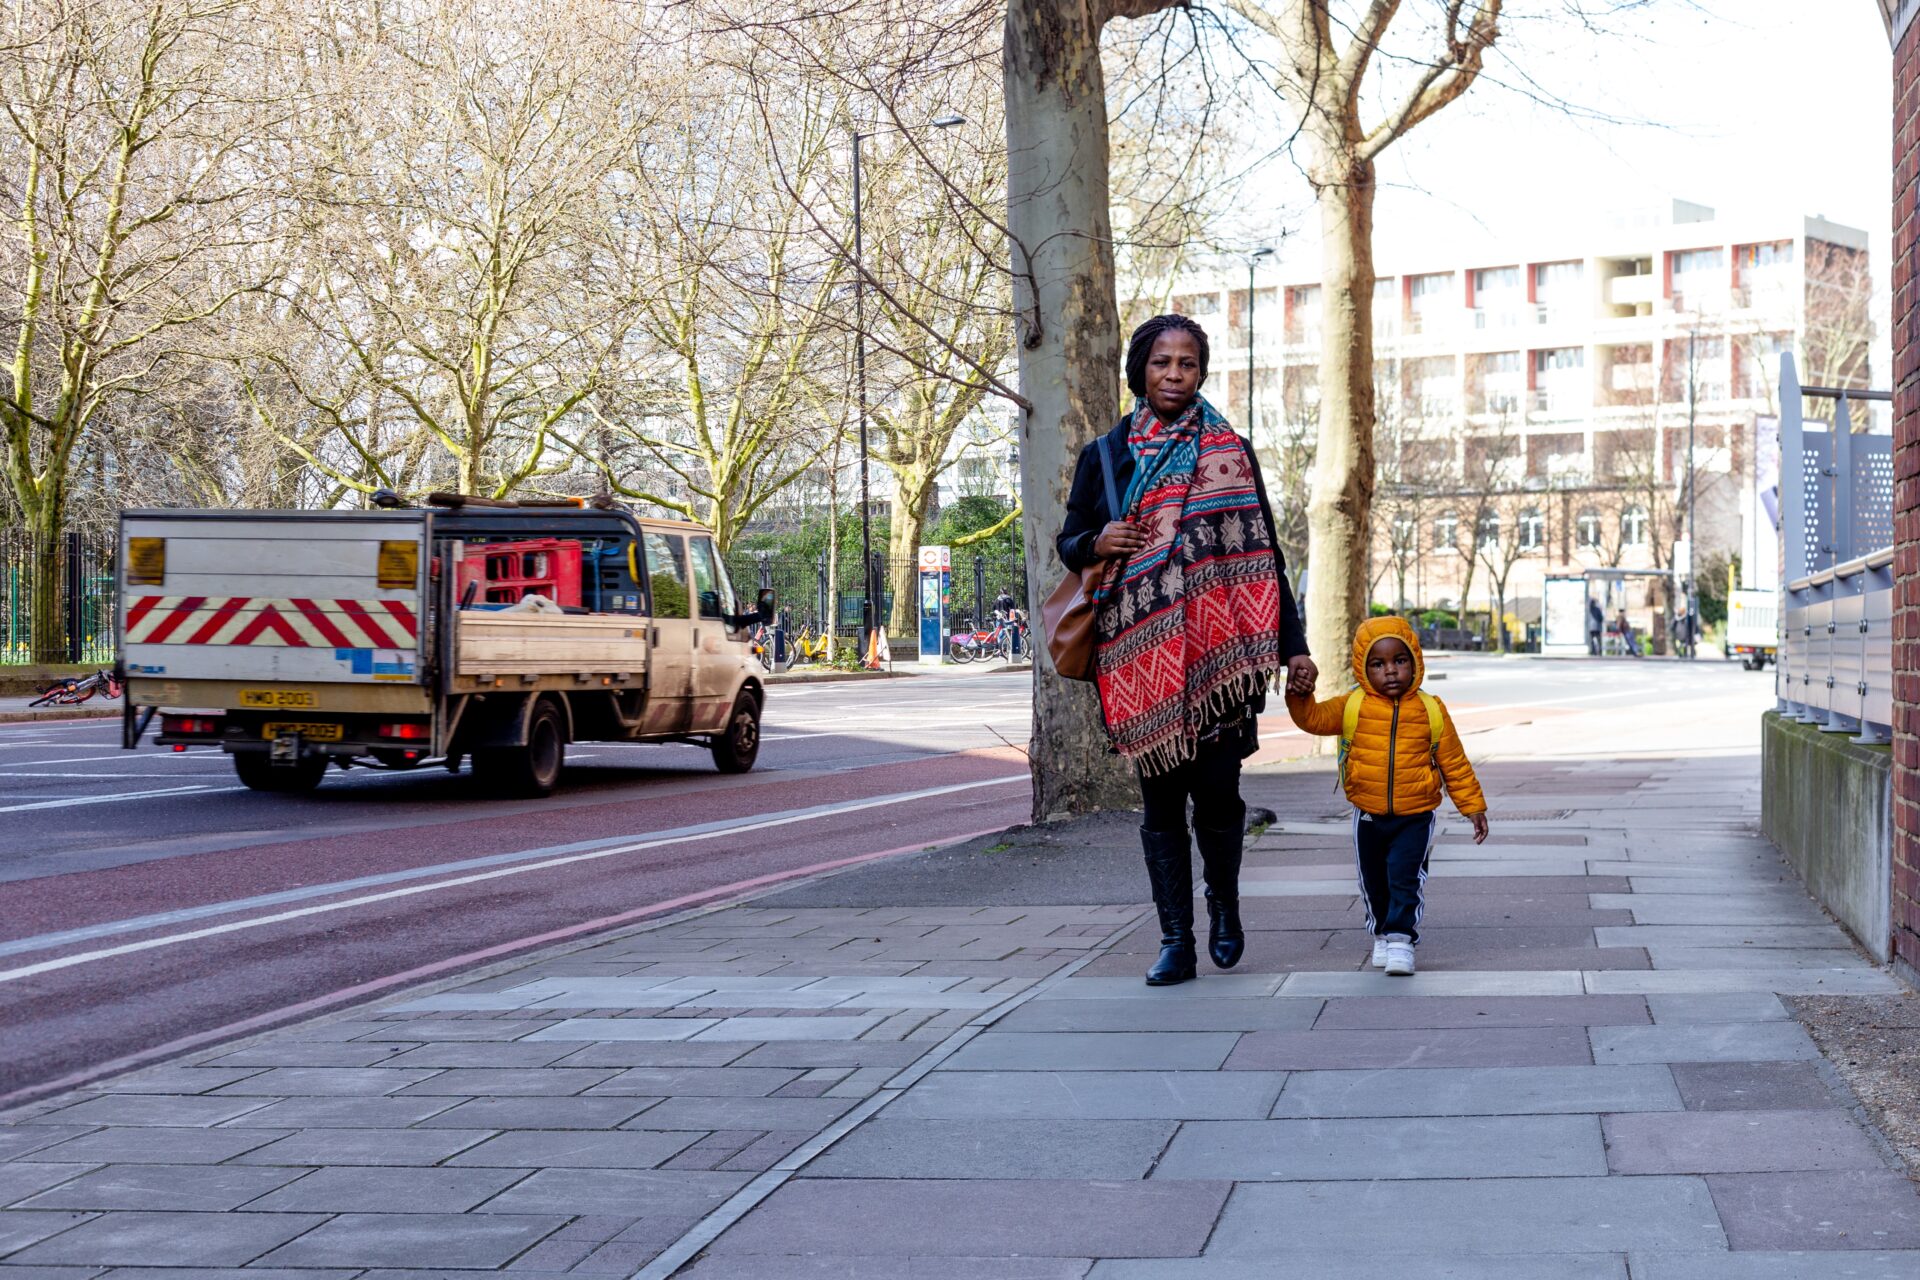 Mum and child walking along the pavement in a London street